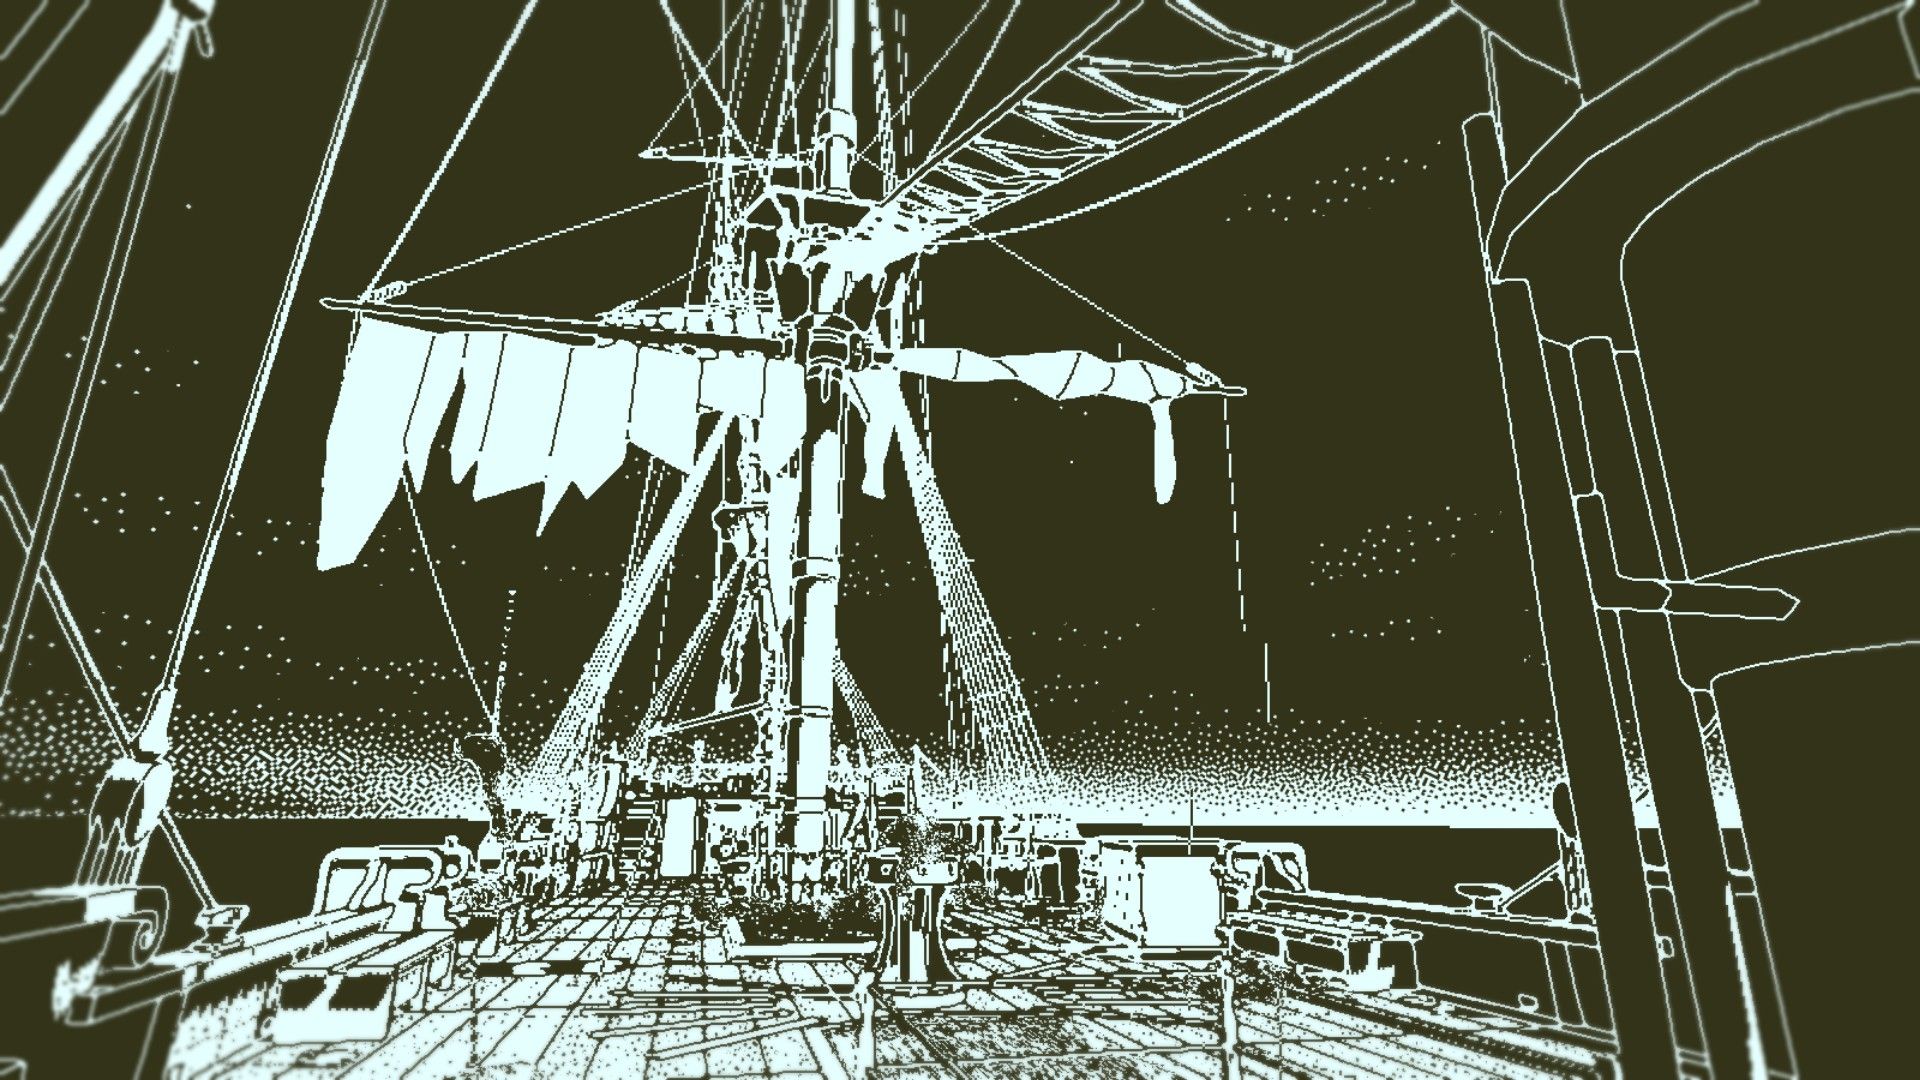 Thoughts: Return Of The Obra Dinn. The Scientific Gamer